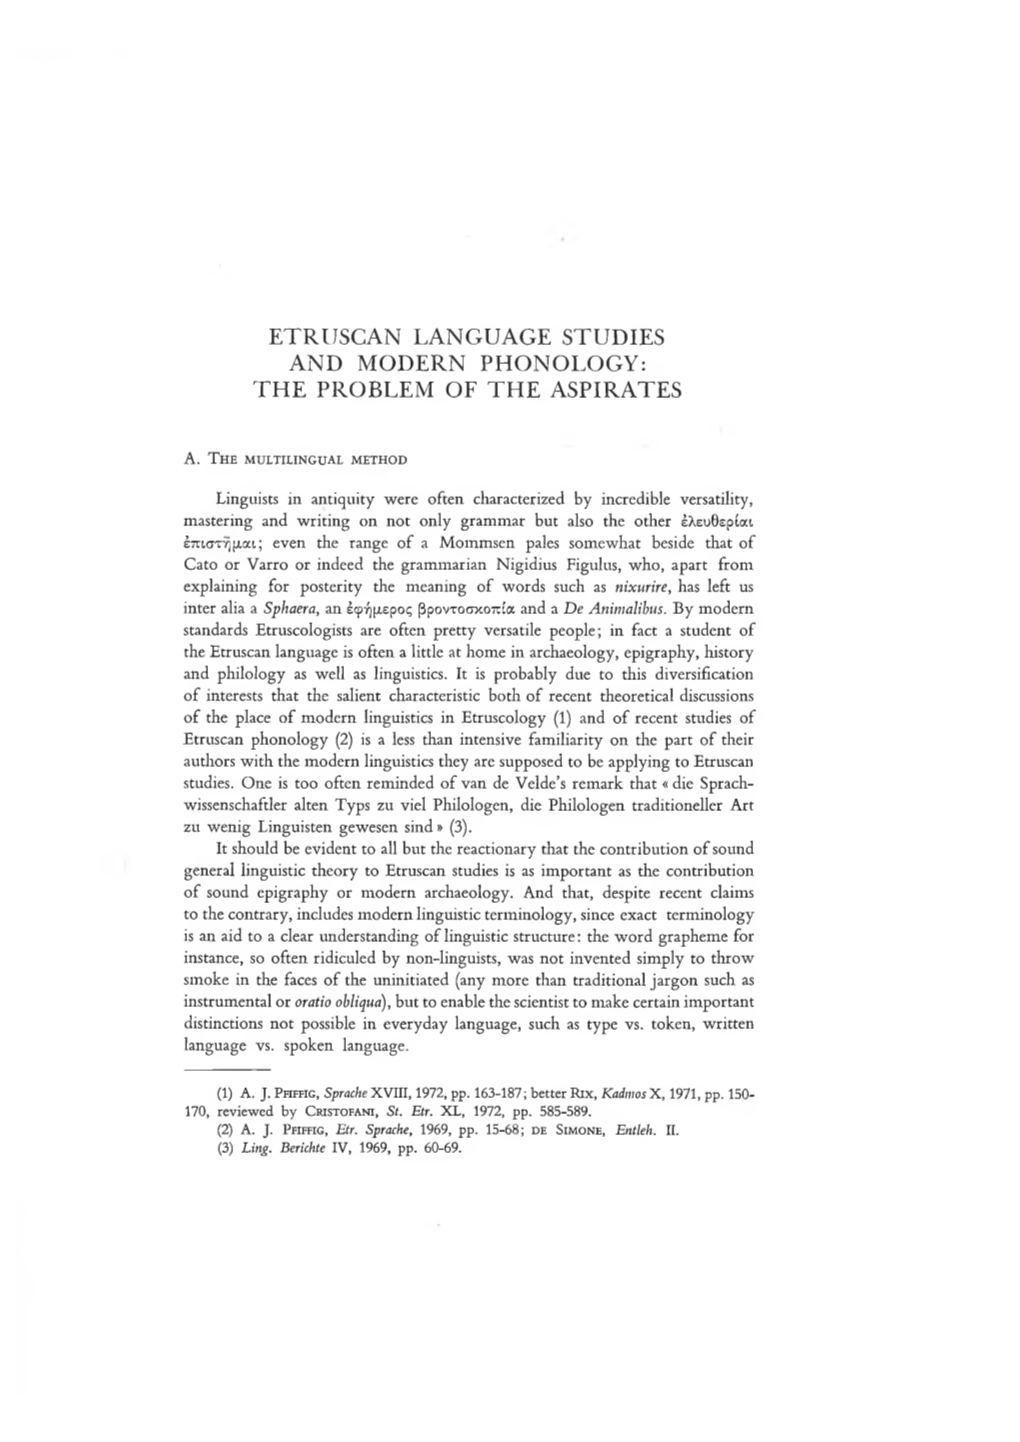 Etruscan Language Studies and Modern Phonology: the Problem of the Aspirates